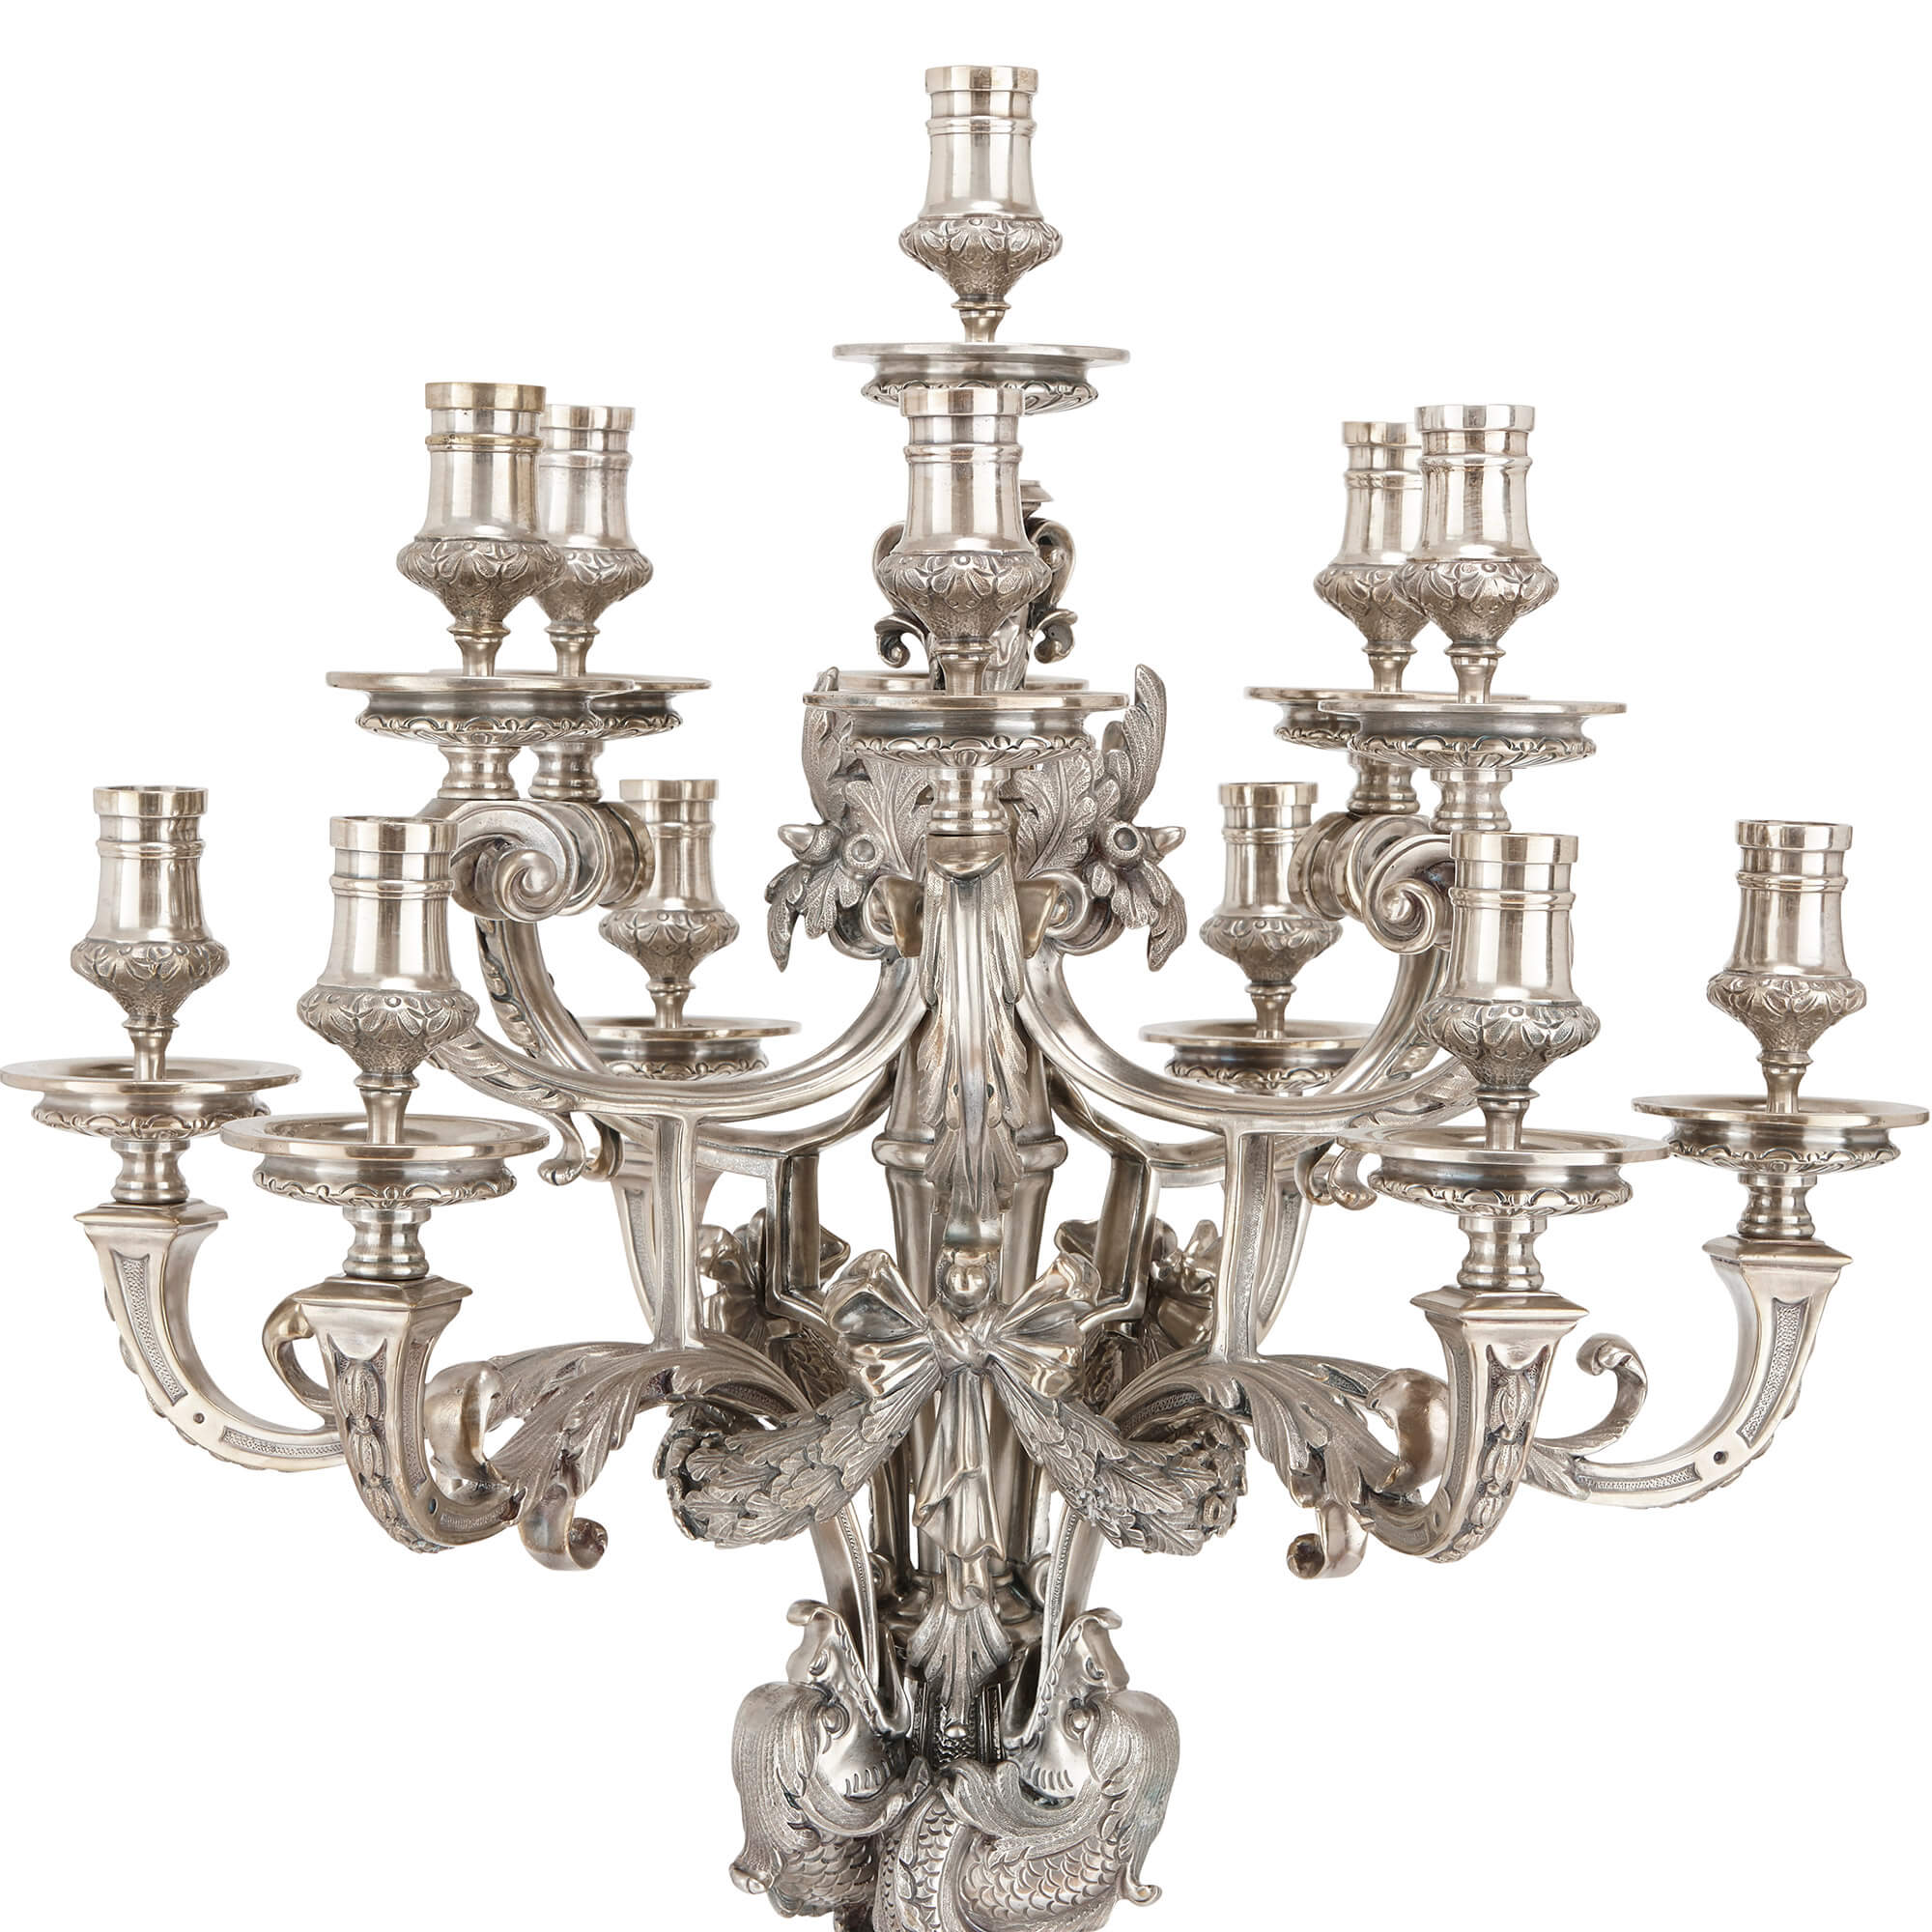 Large pair of Louis XIV style silvered bronze candelabra | Mayfair Gallery